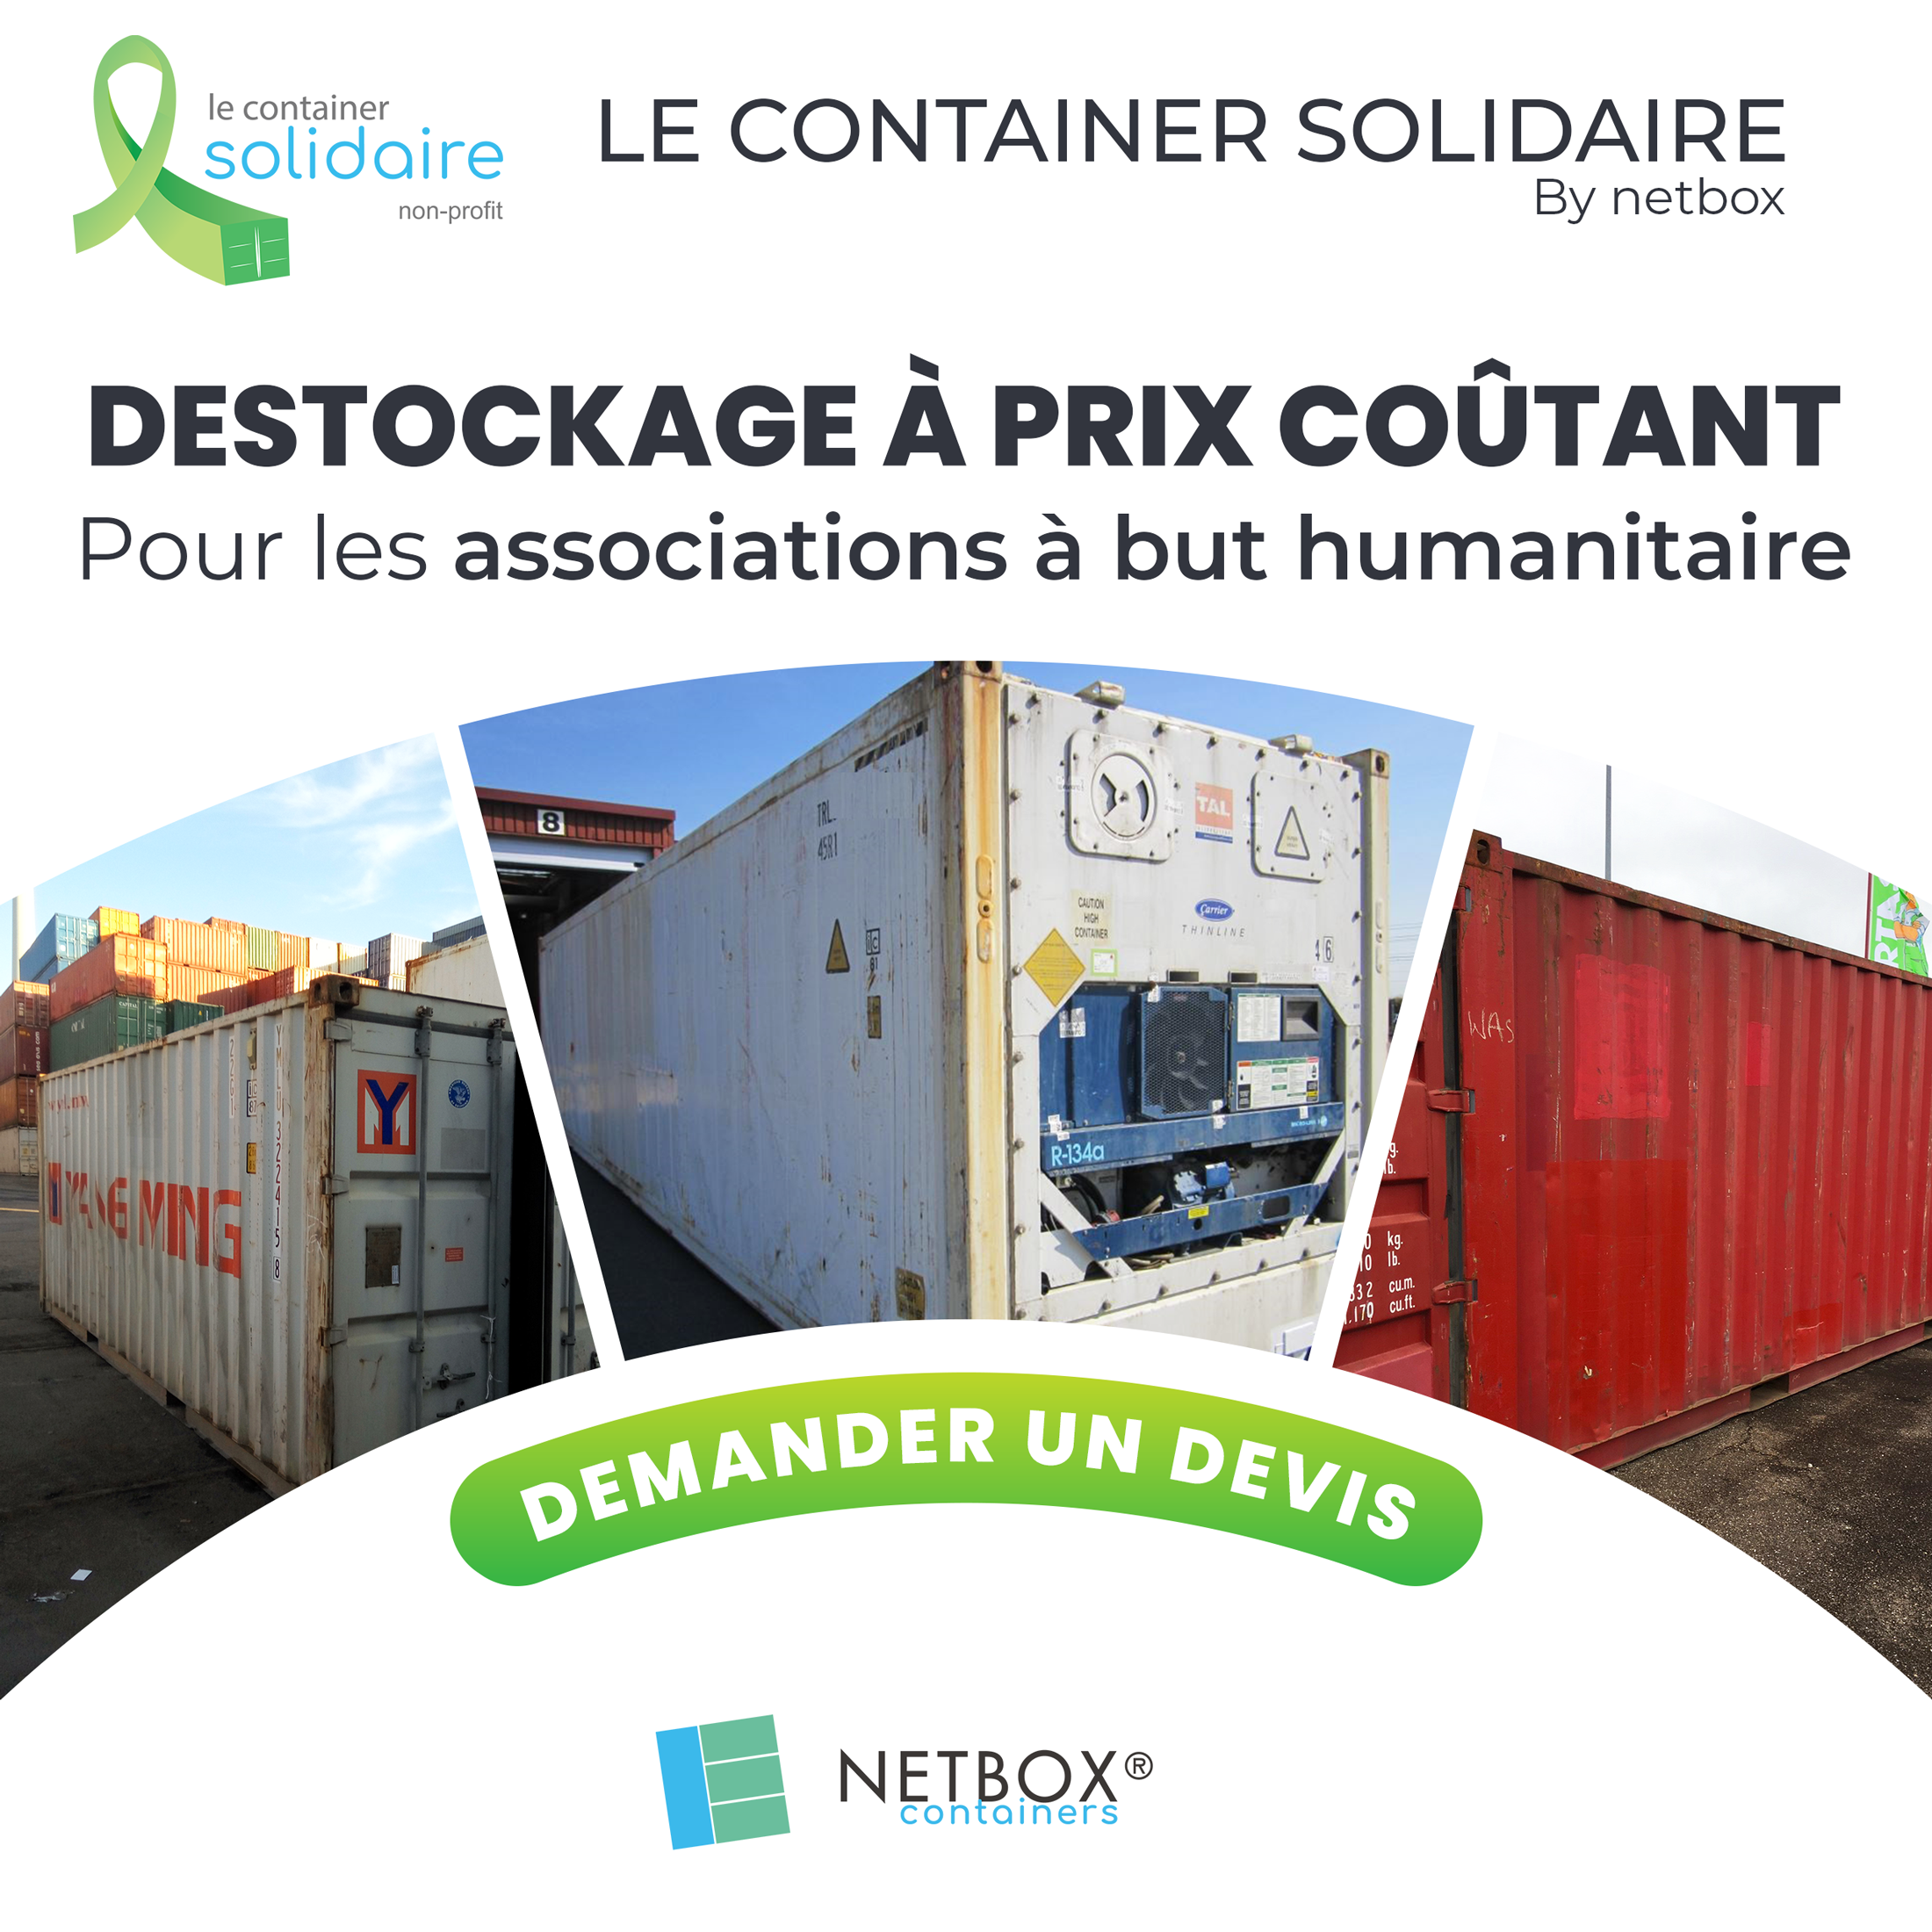 Netbox_pop-up-website_container-solidaire